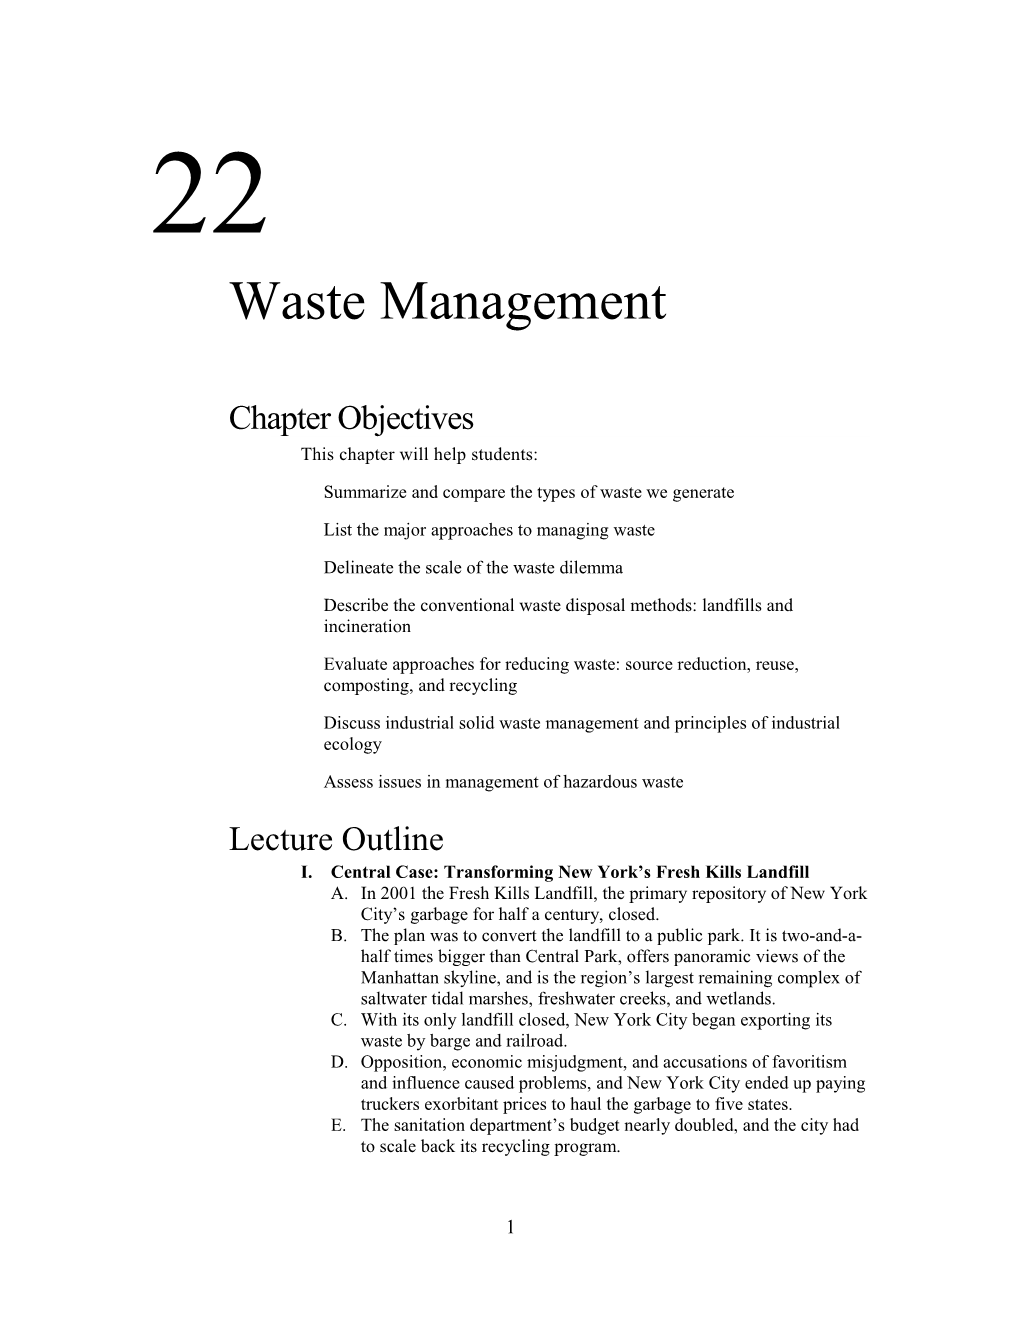 Summarize and Compare the Types of Waste We Generate